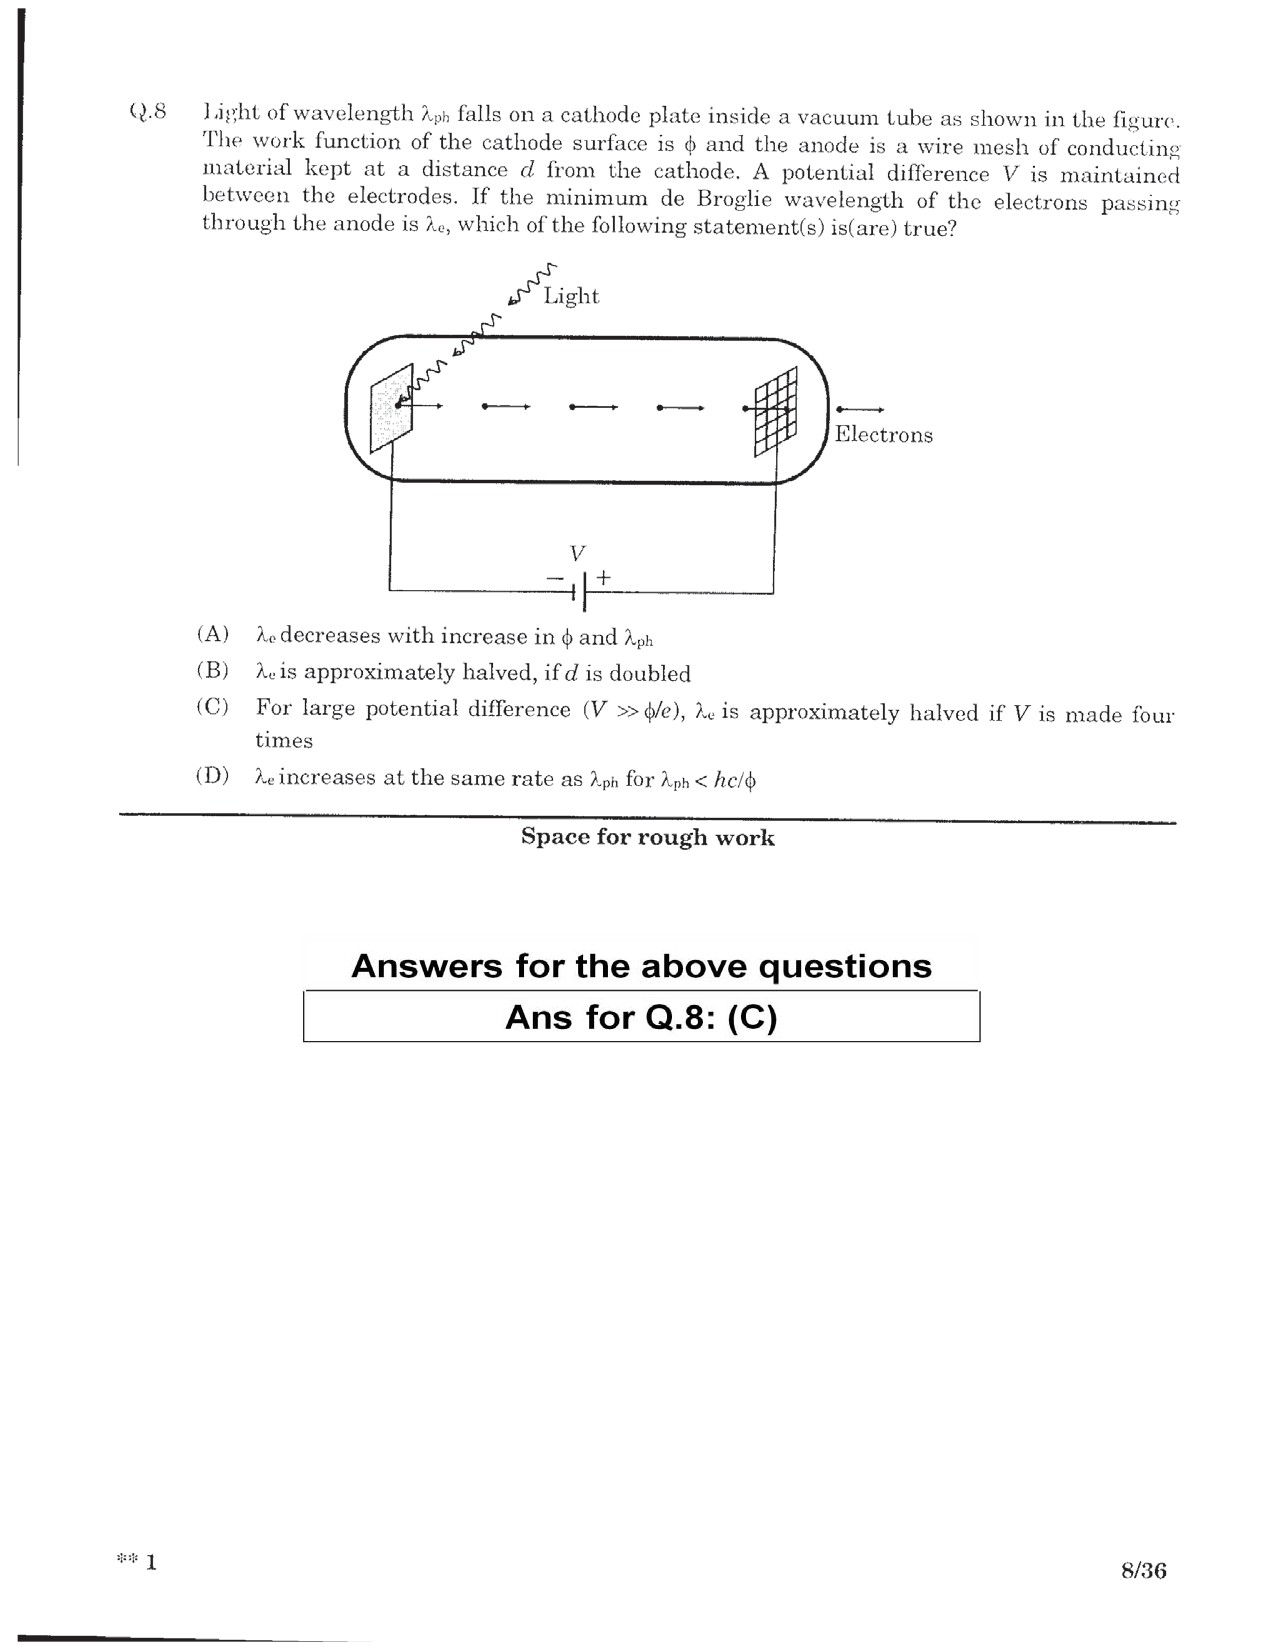 JEE Advanced Exam Question Paper 2016 Paper 2 Physics 6